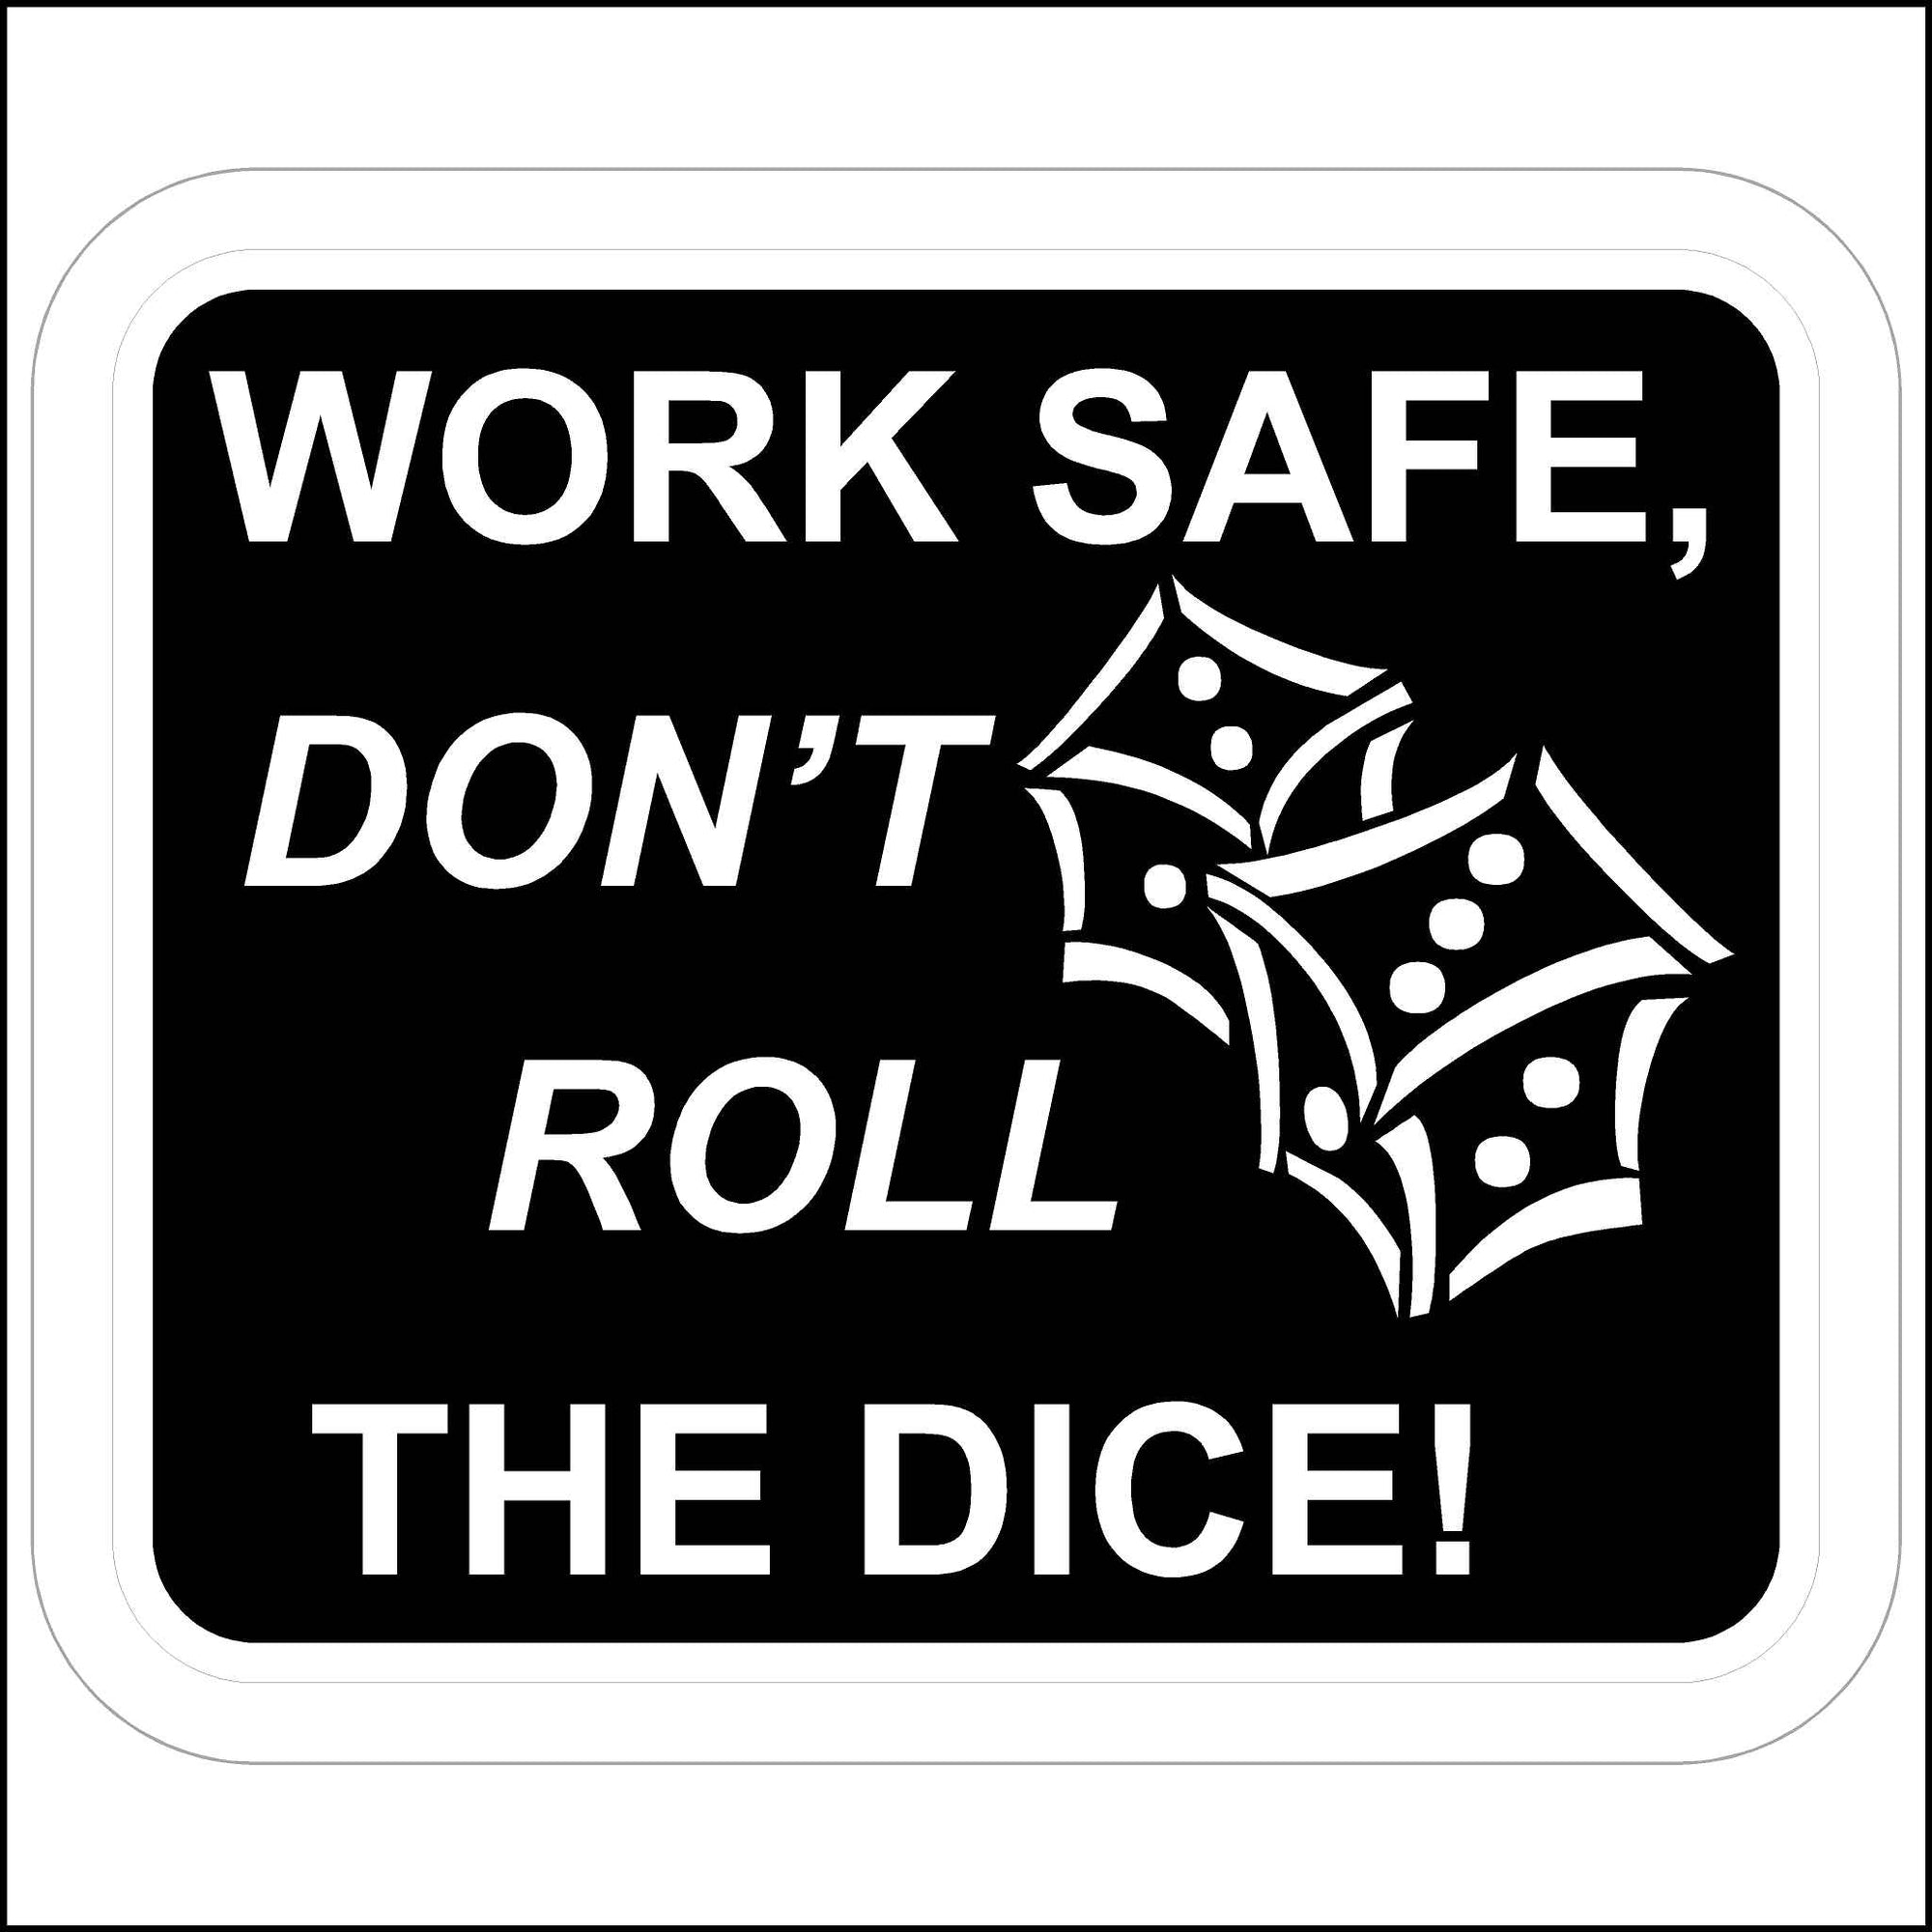 Work Safe Don't Roll The Dice Sticker printed in black and white